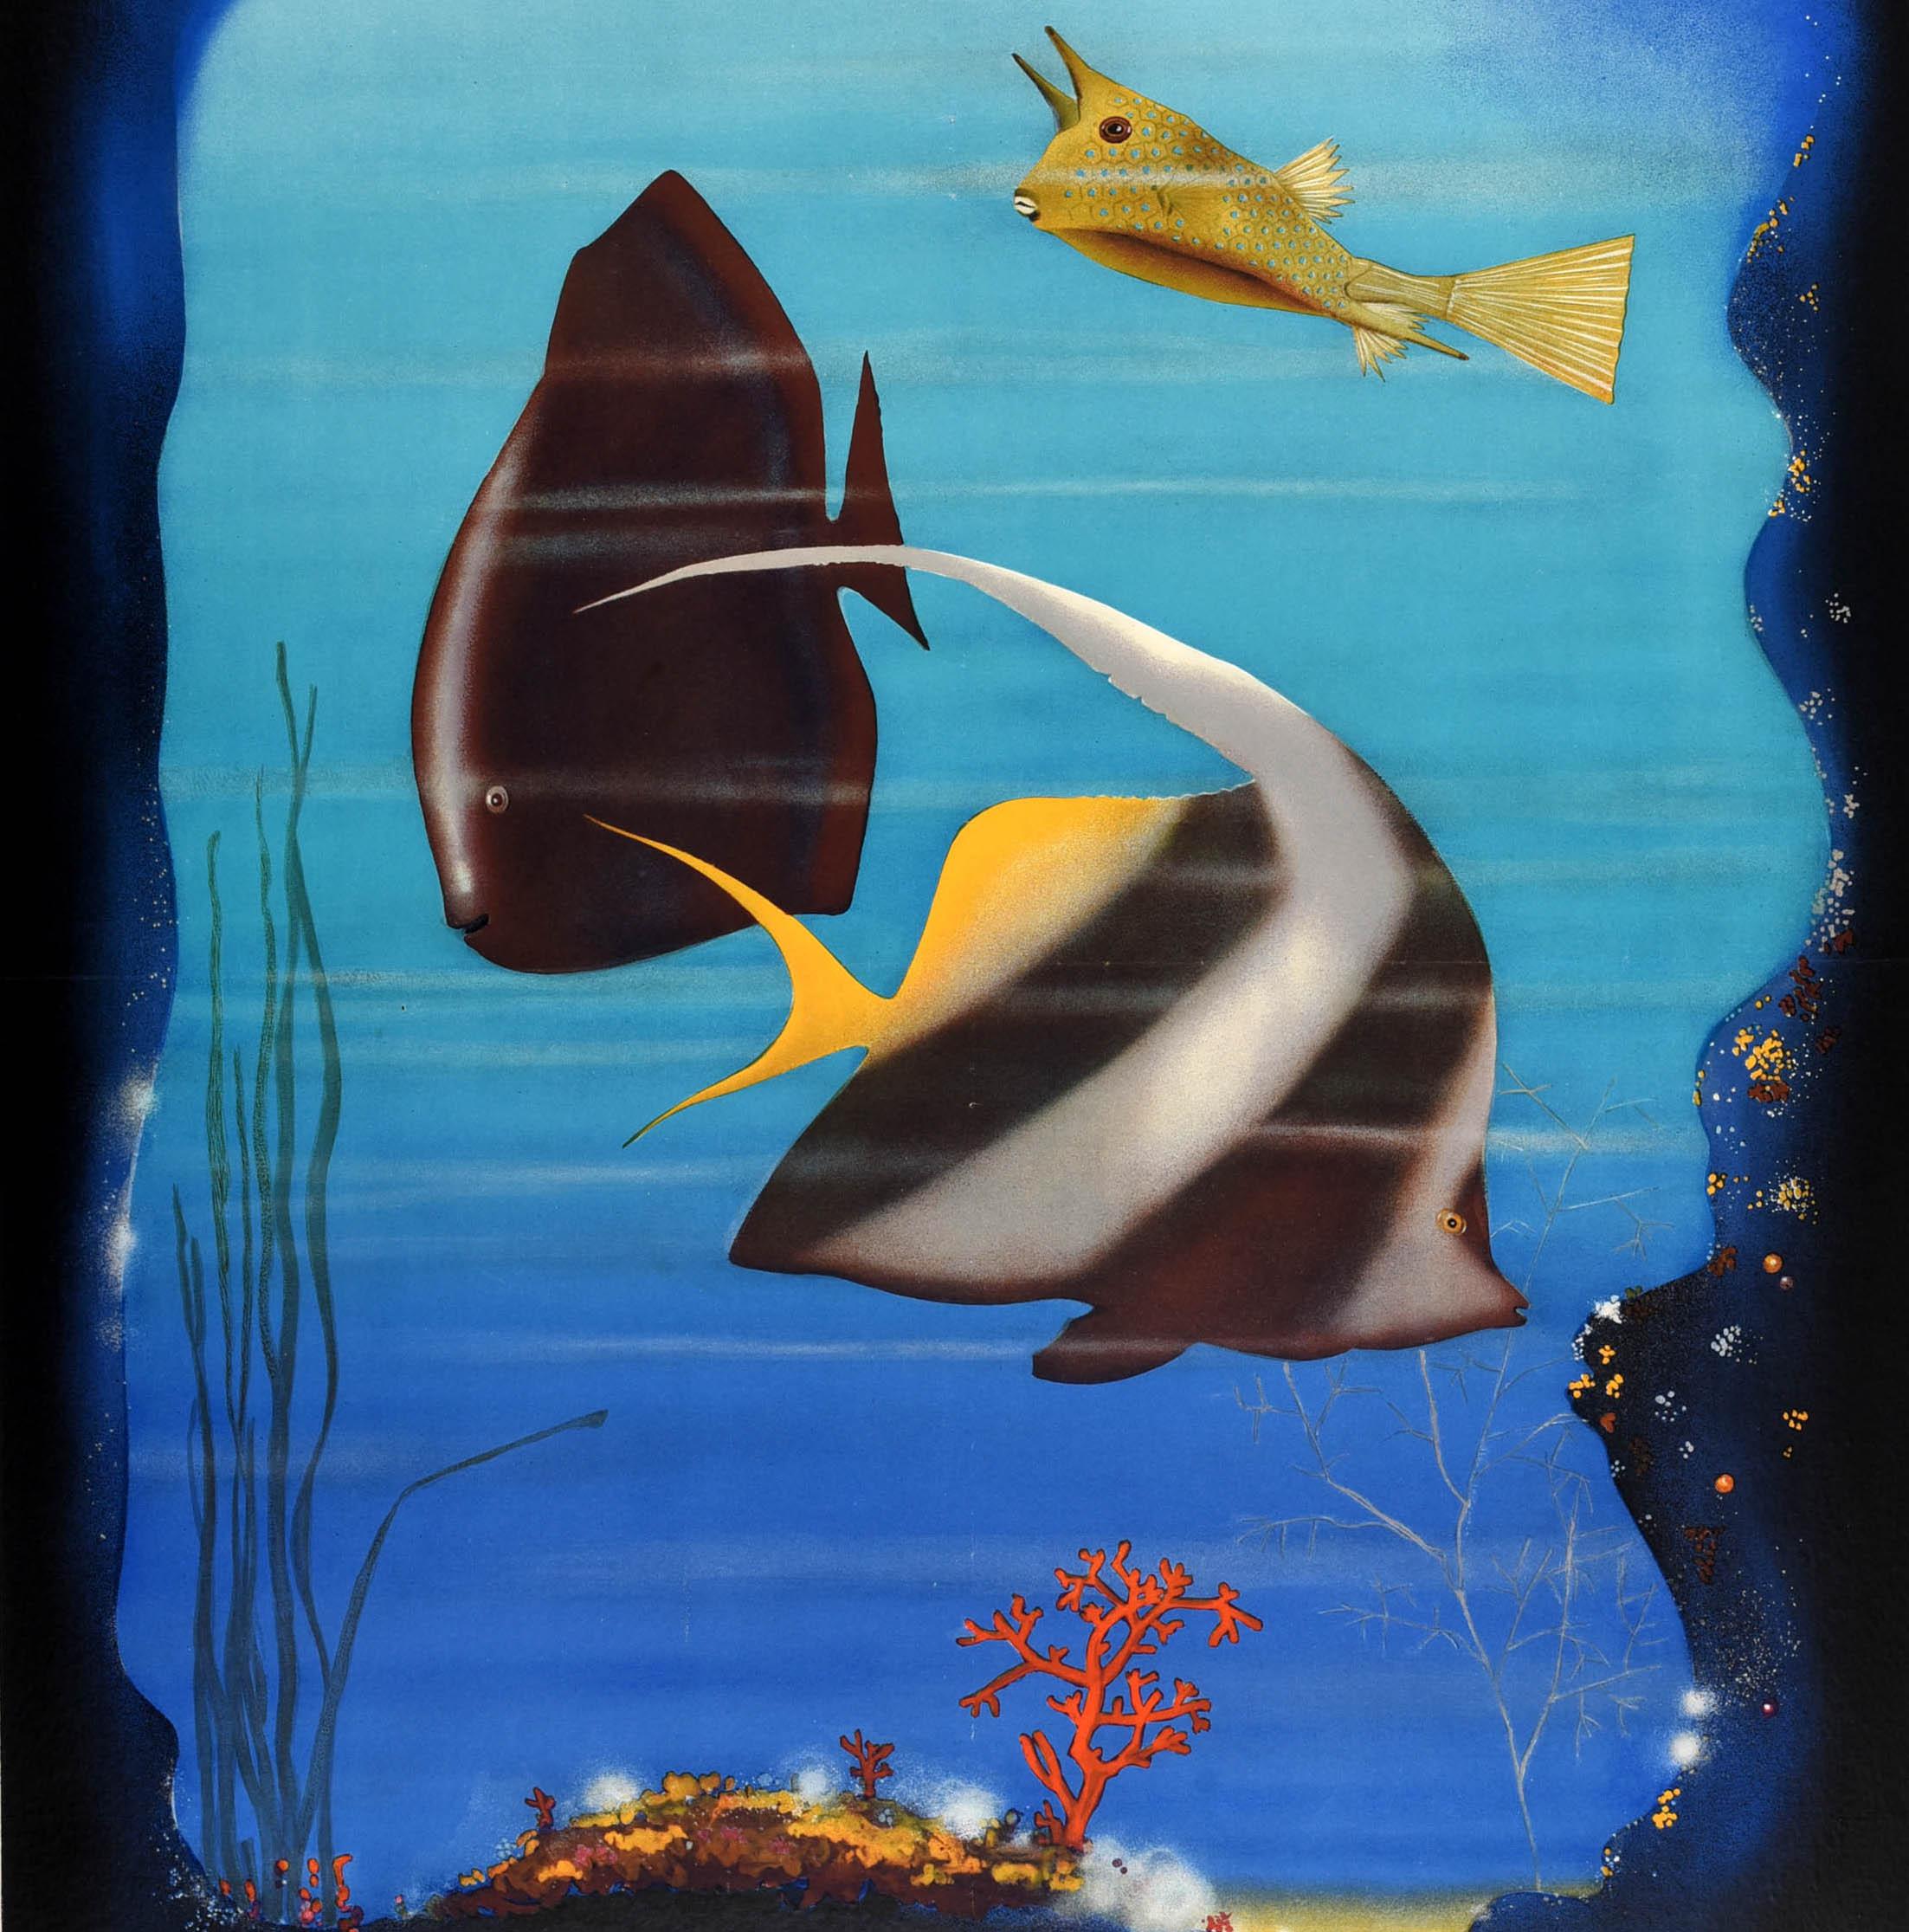 Original vintage travel poster for advertising the Monaco Aquarium featuring a great design depicting fish swimming with weeds and corals on the sandy bottom and the edges glistening on the dark background, the stylised lettering above and below.